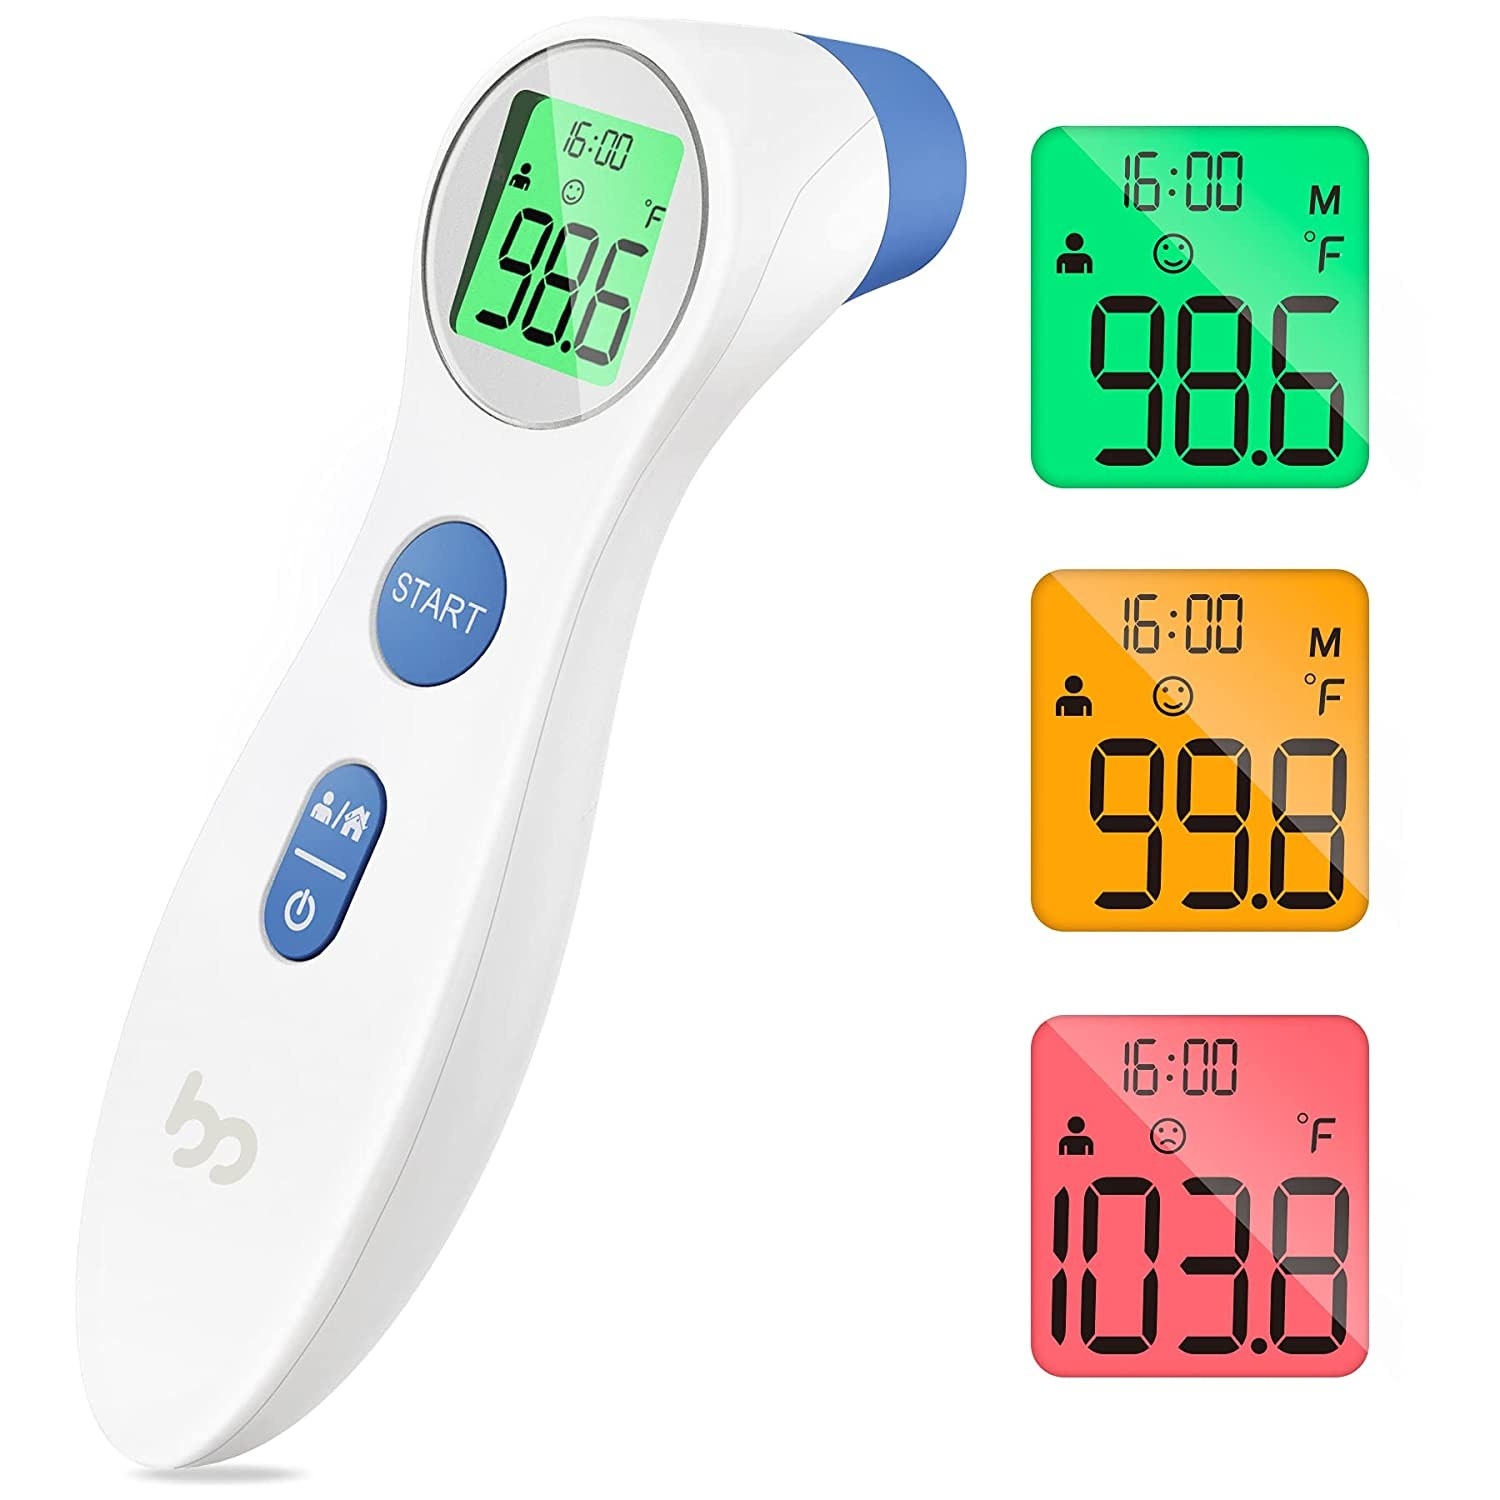 a touchless forehead thermometer